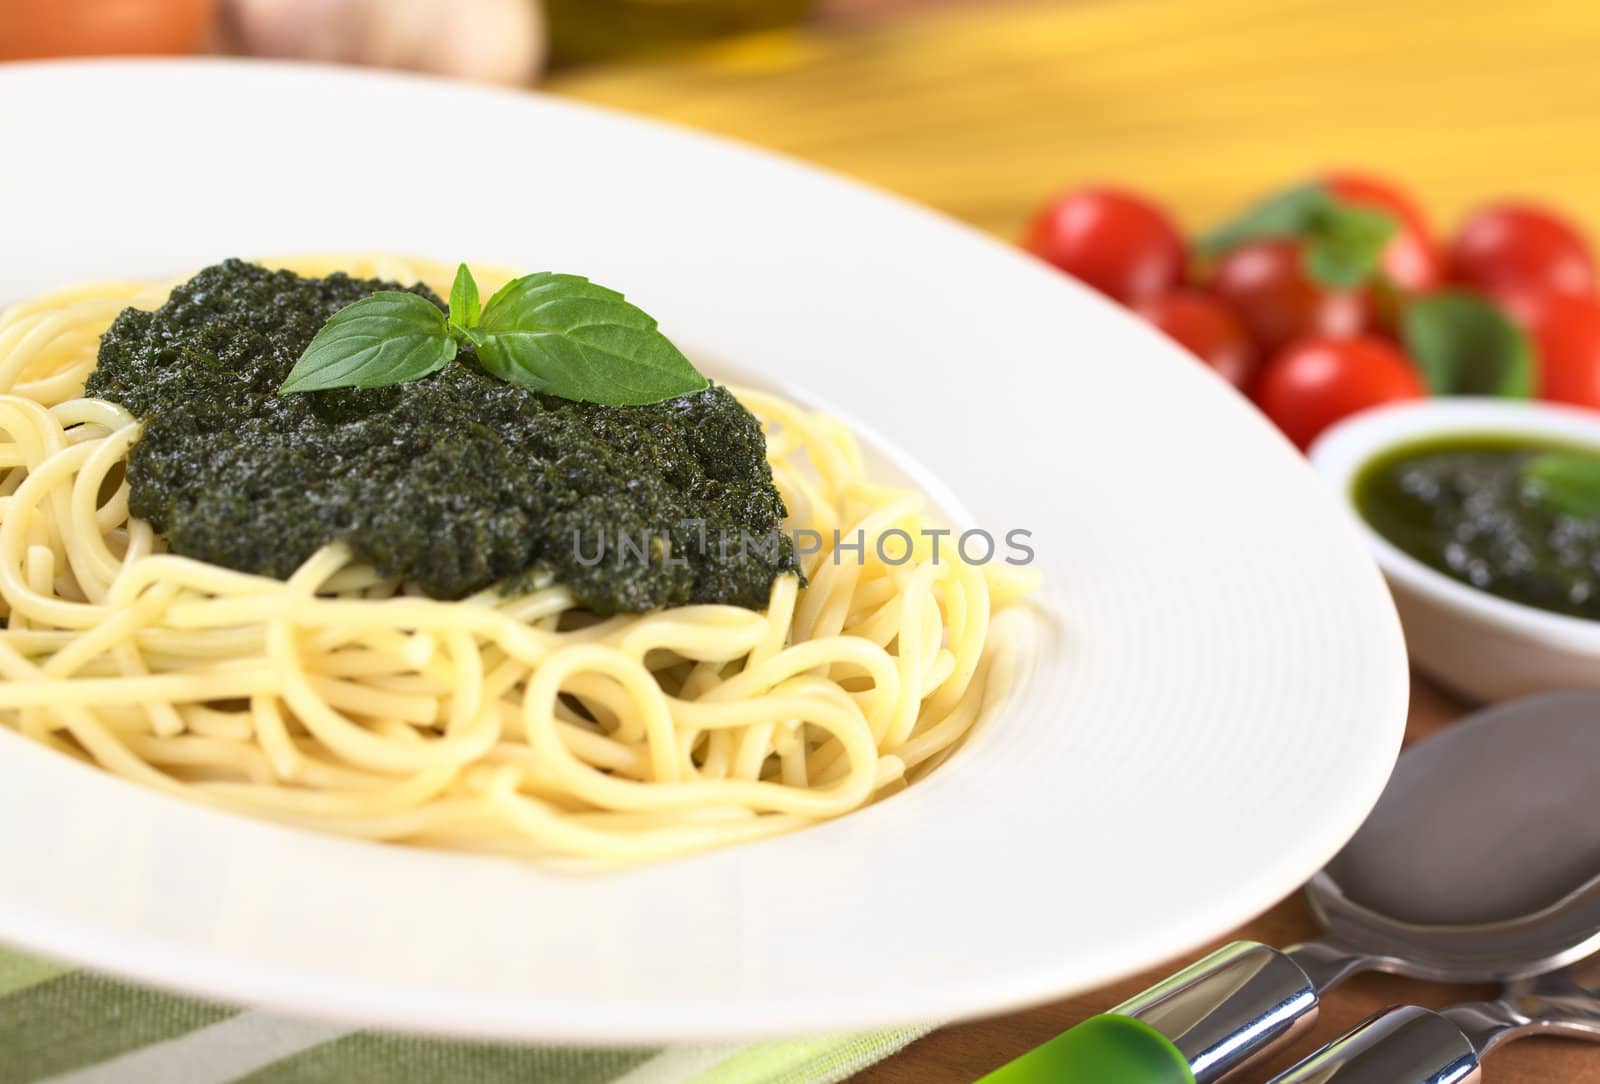 Spaghetti with fresh pesto made of basil, garlic and olive oil garnished with basil leaf (Selective Focus, Focus on the basil leaf on the pesto)